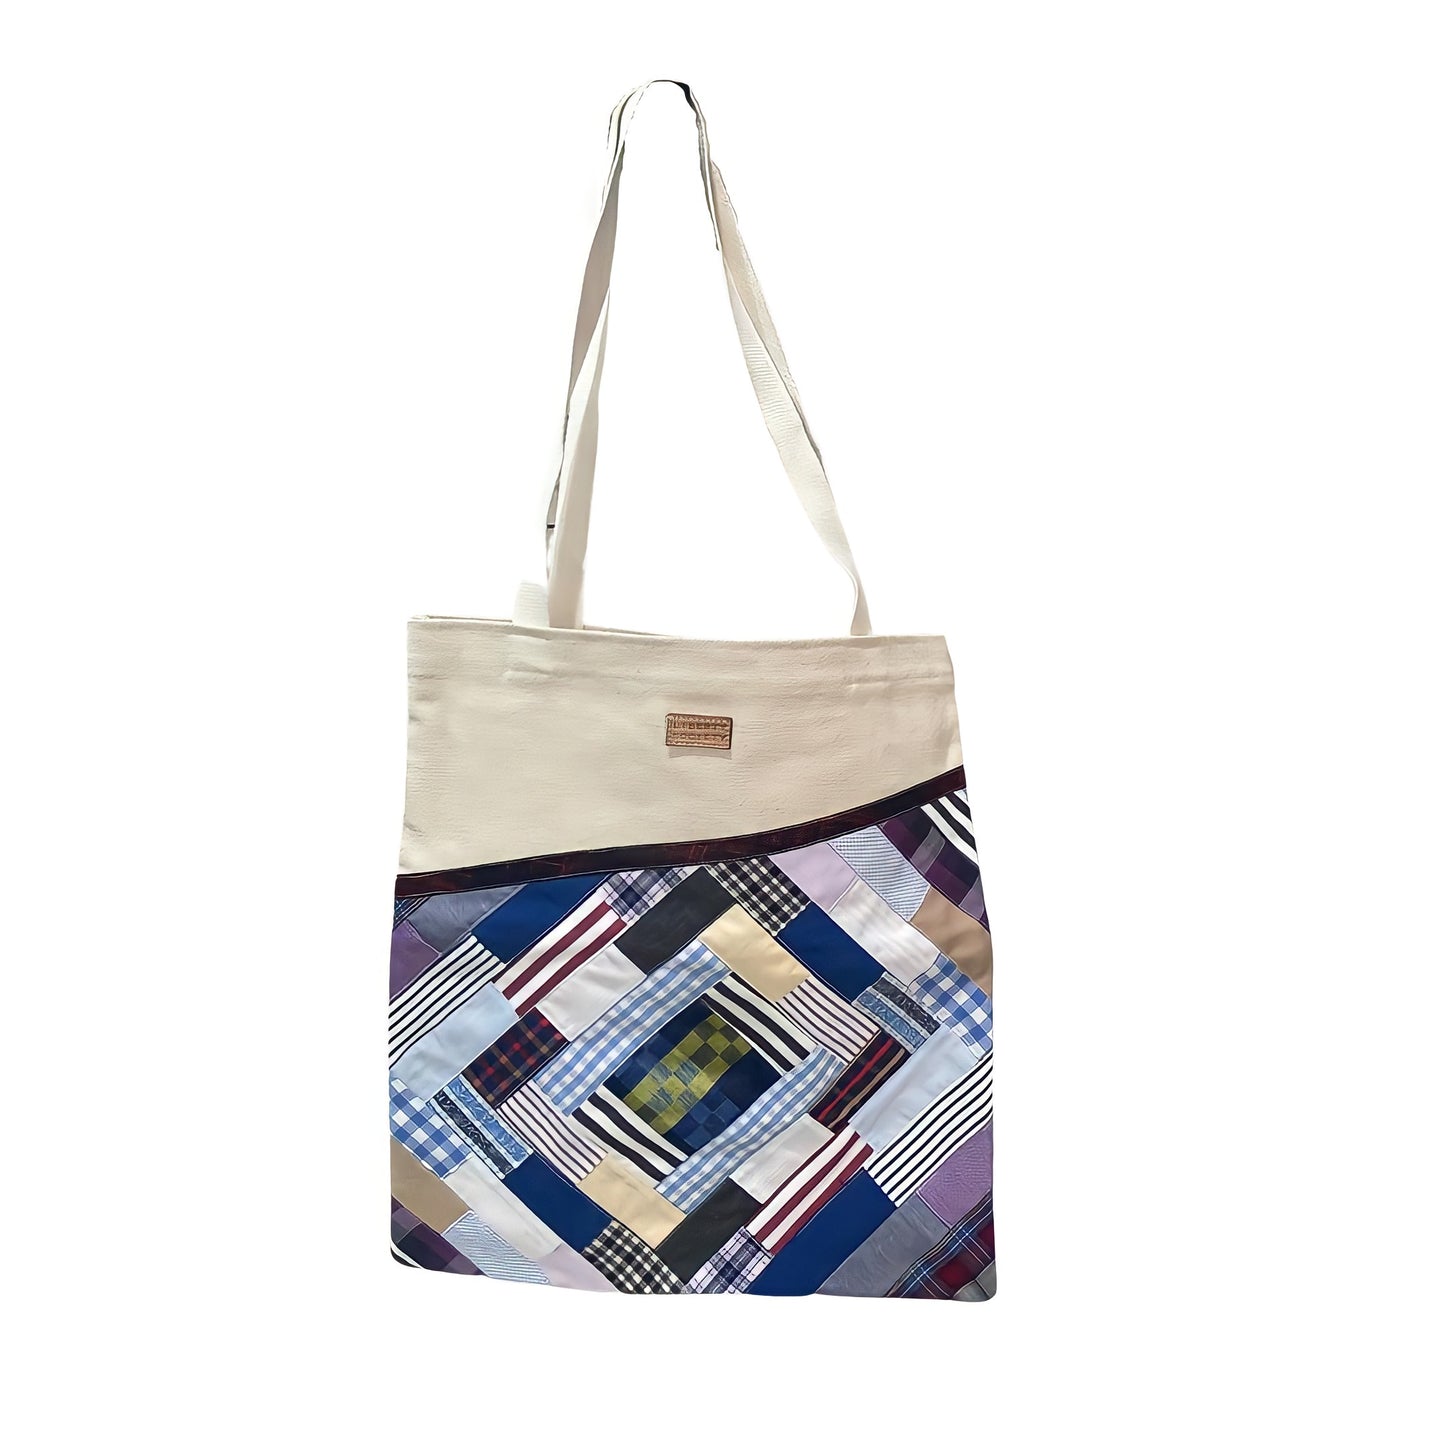 Upcycled Fabric Tote Bag